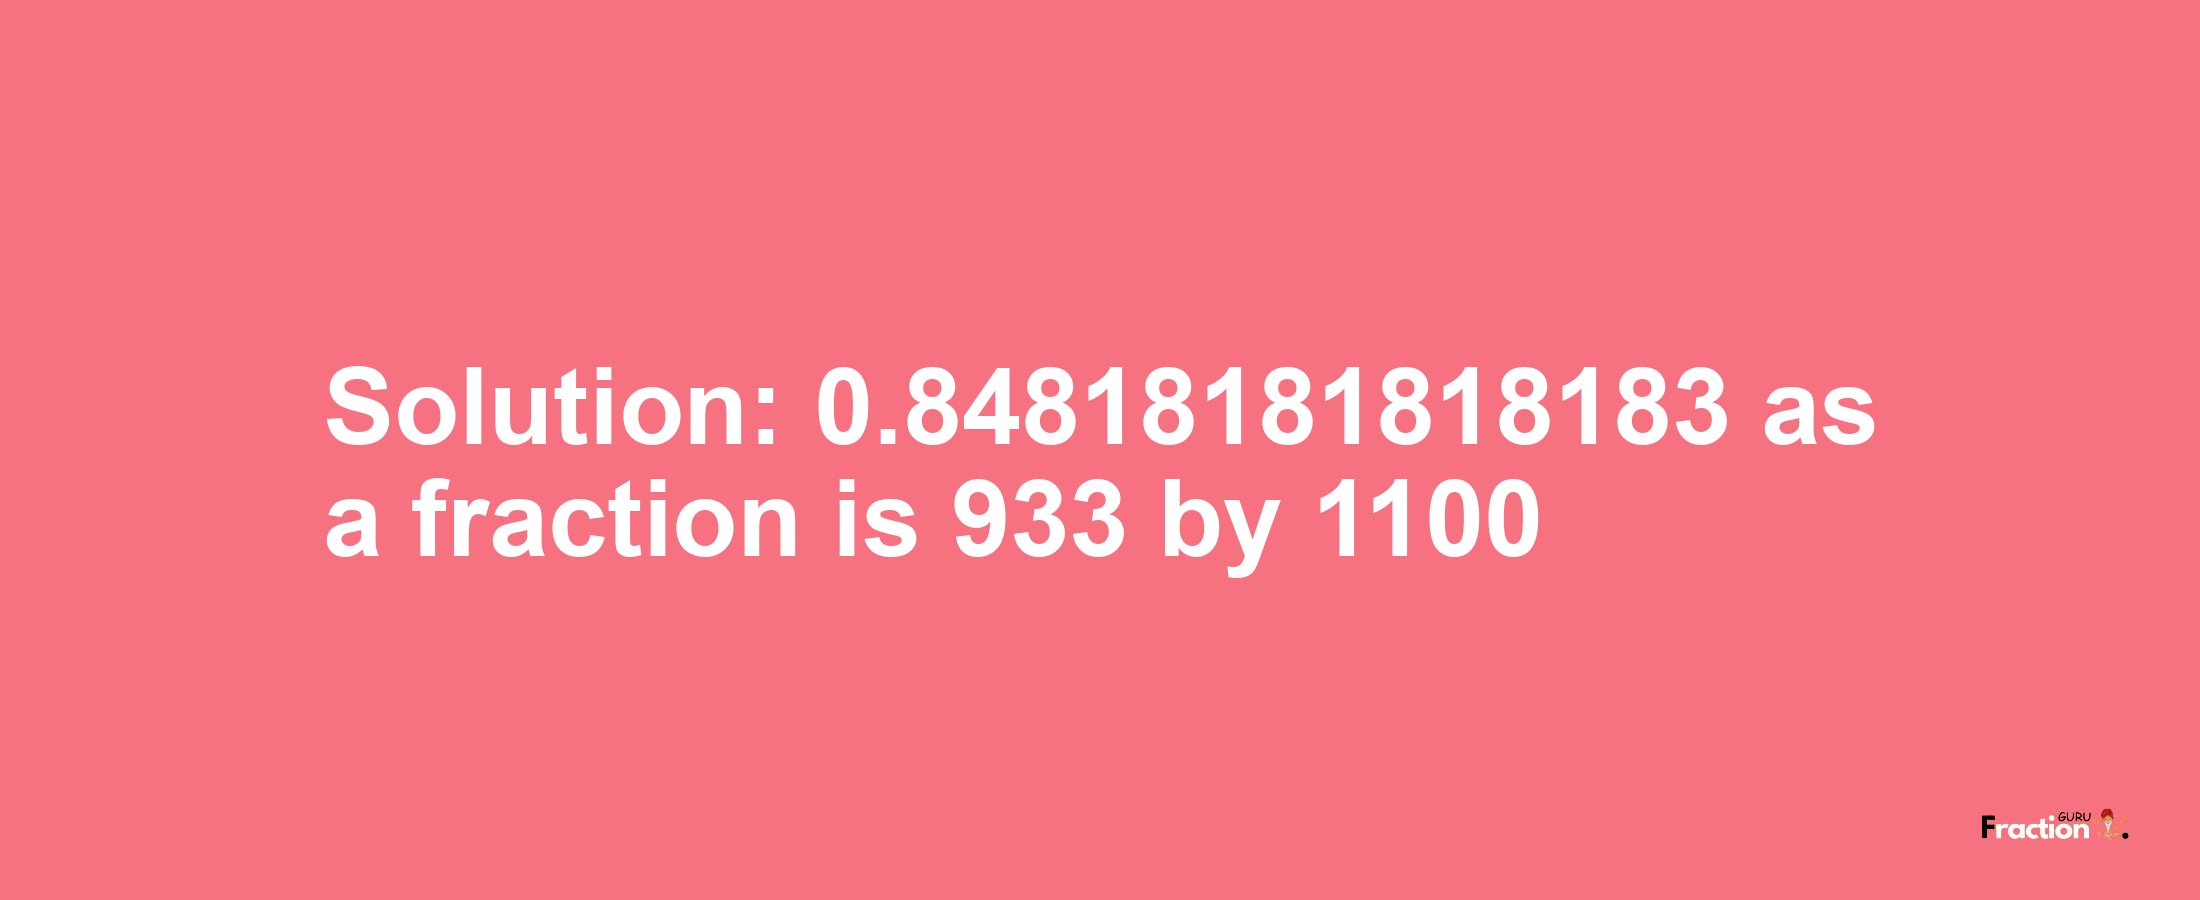 Solution:0.84818181818183 as a fraction is 933/1100